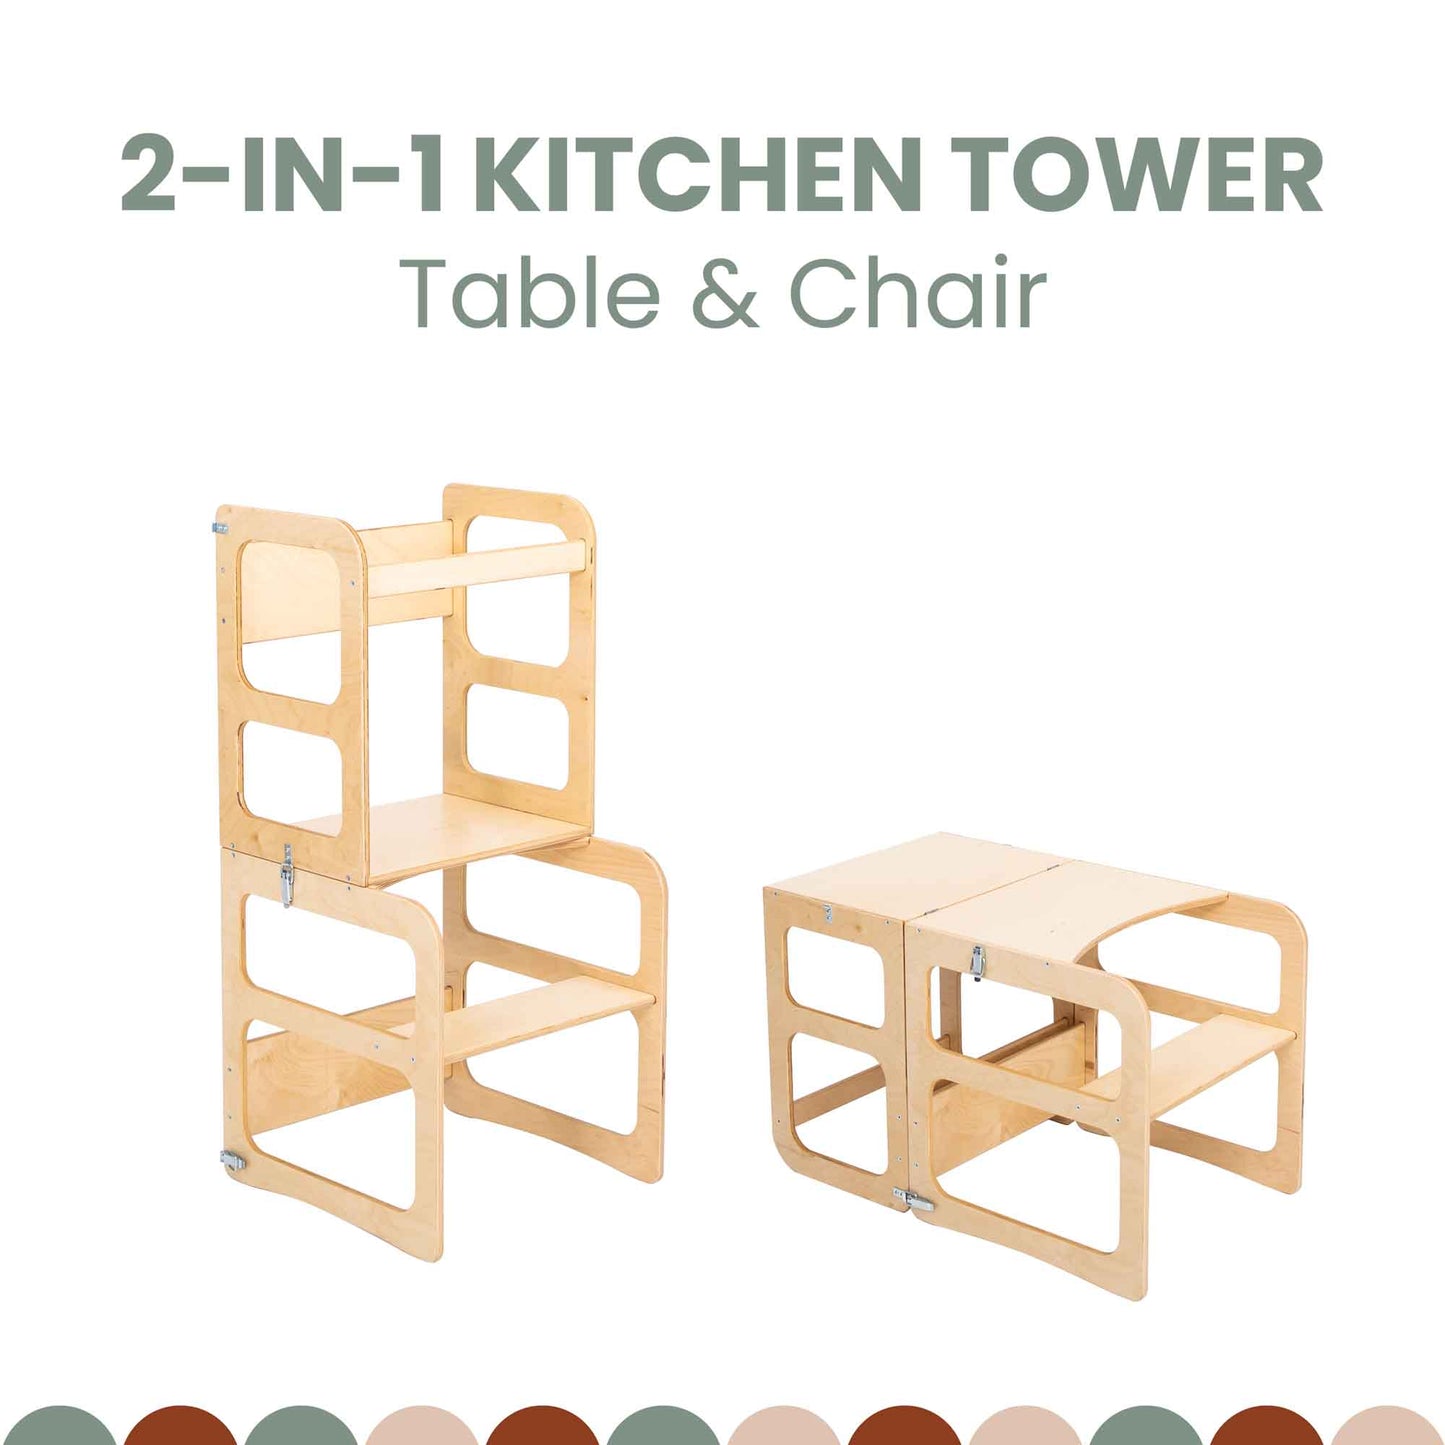 Introducing the 2-in-1 Transformable Kitchen Tower - Table and Chair Set, perfect for your young chef. This convertible wooden kitchen tower effortlessly transforms into a table and chair, making it an ideal Montessori helper tower for budding cooks.